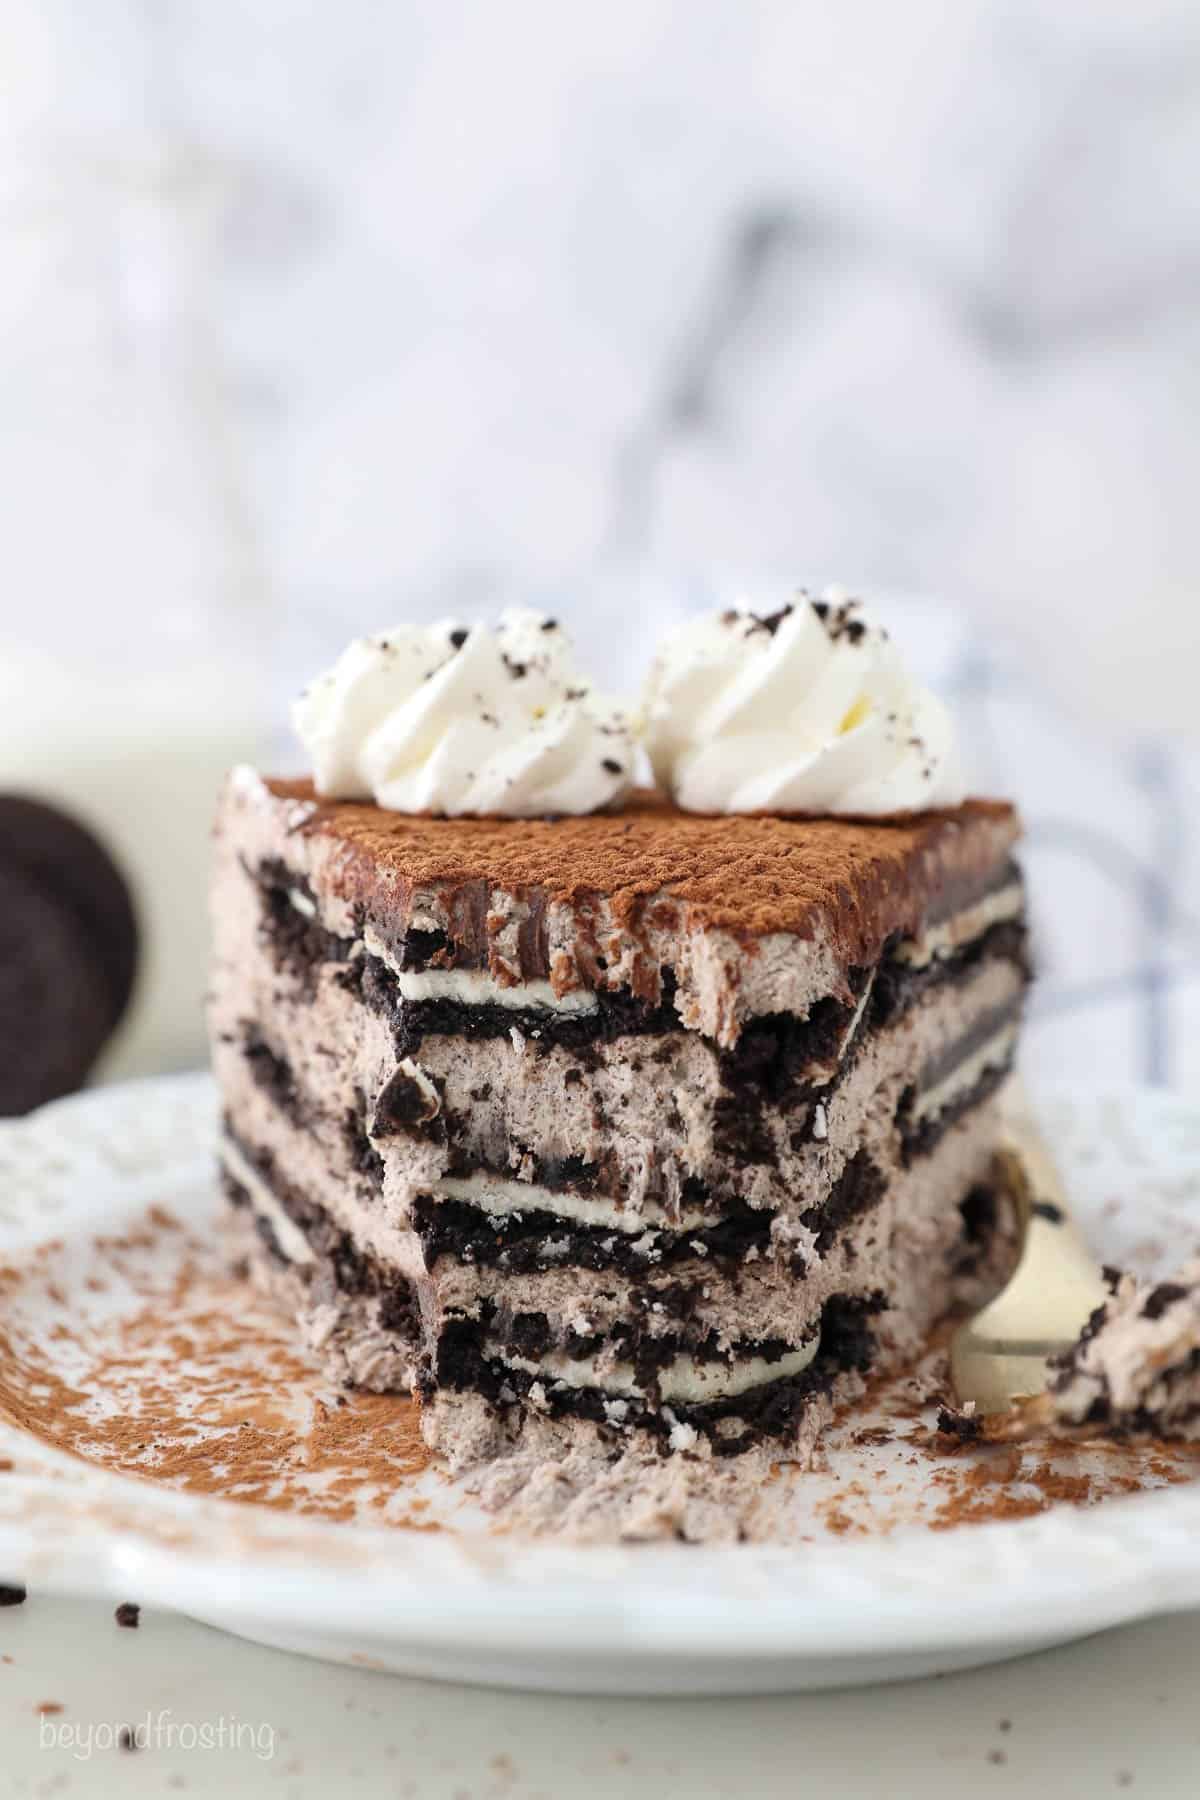 A slice of Oreo Mousse cake with a few bites missing, showing the inside of the cake